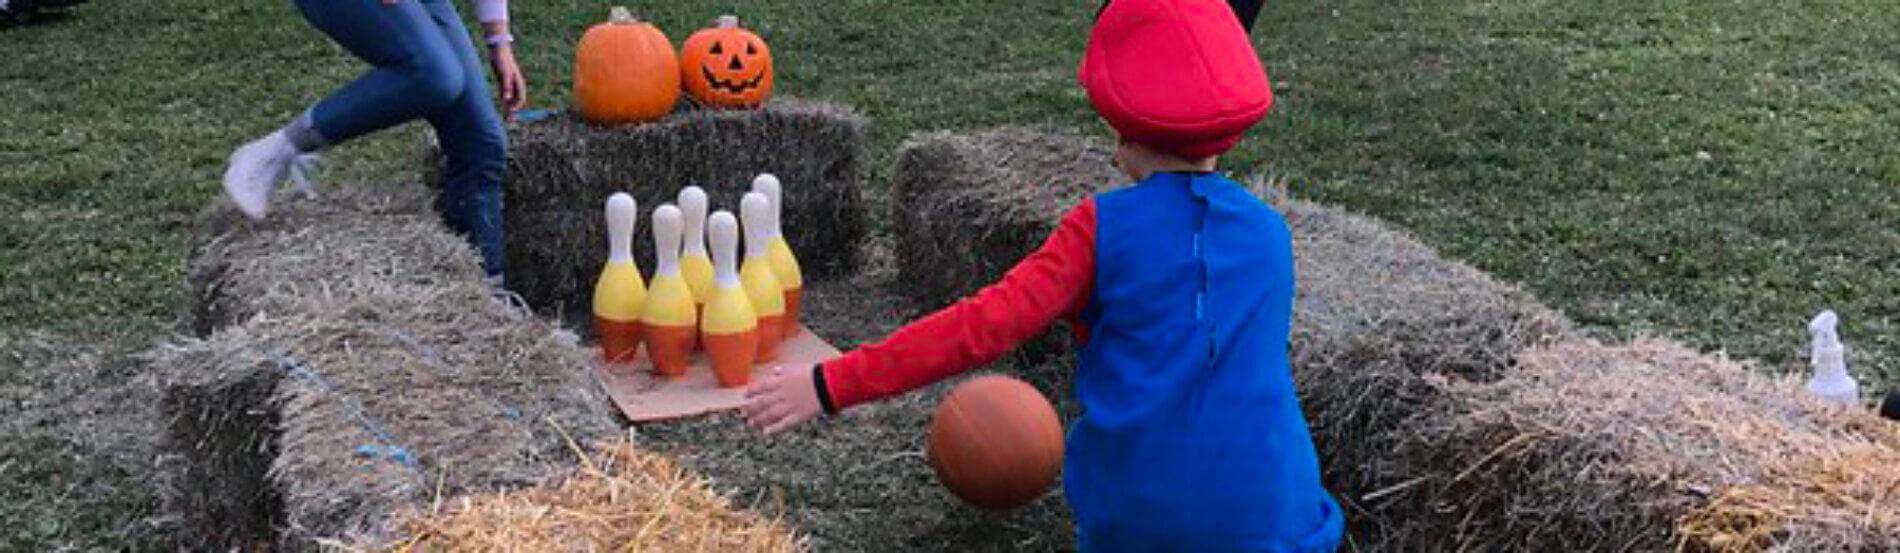 child in costume bowling with a pumpkin